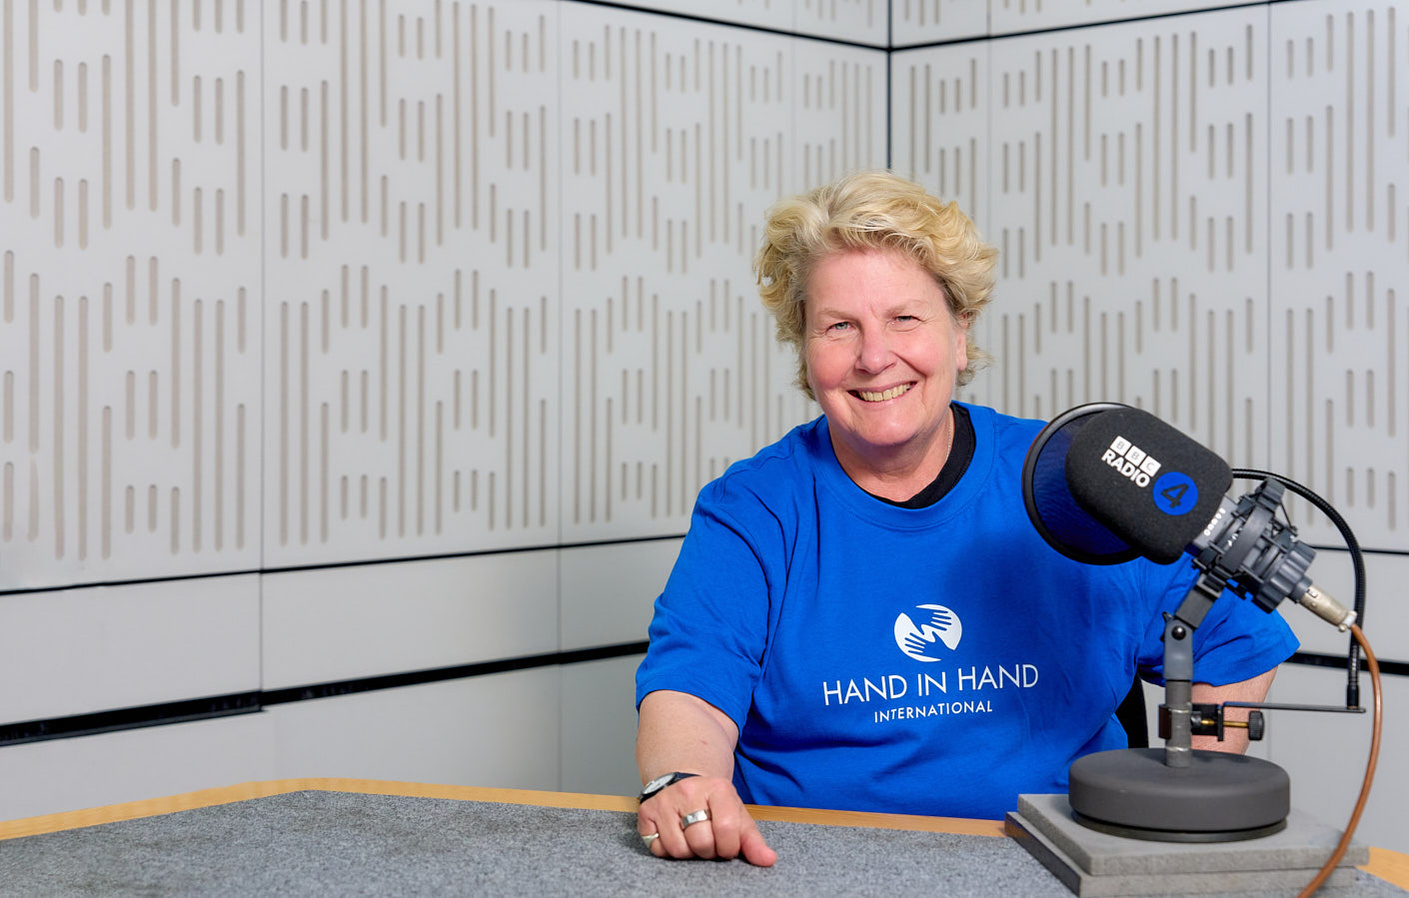 Sandi Toksvig photographed by Josh Caius at the BBC Broadcasting House, for Hand in Hand International radio appeal.